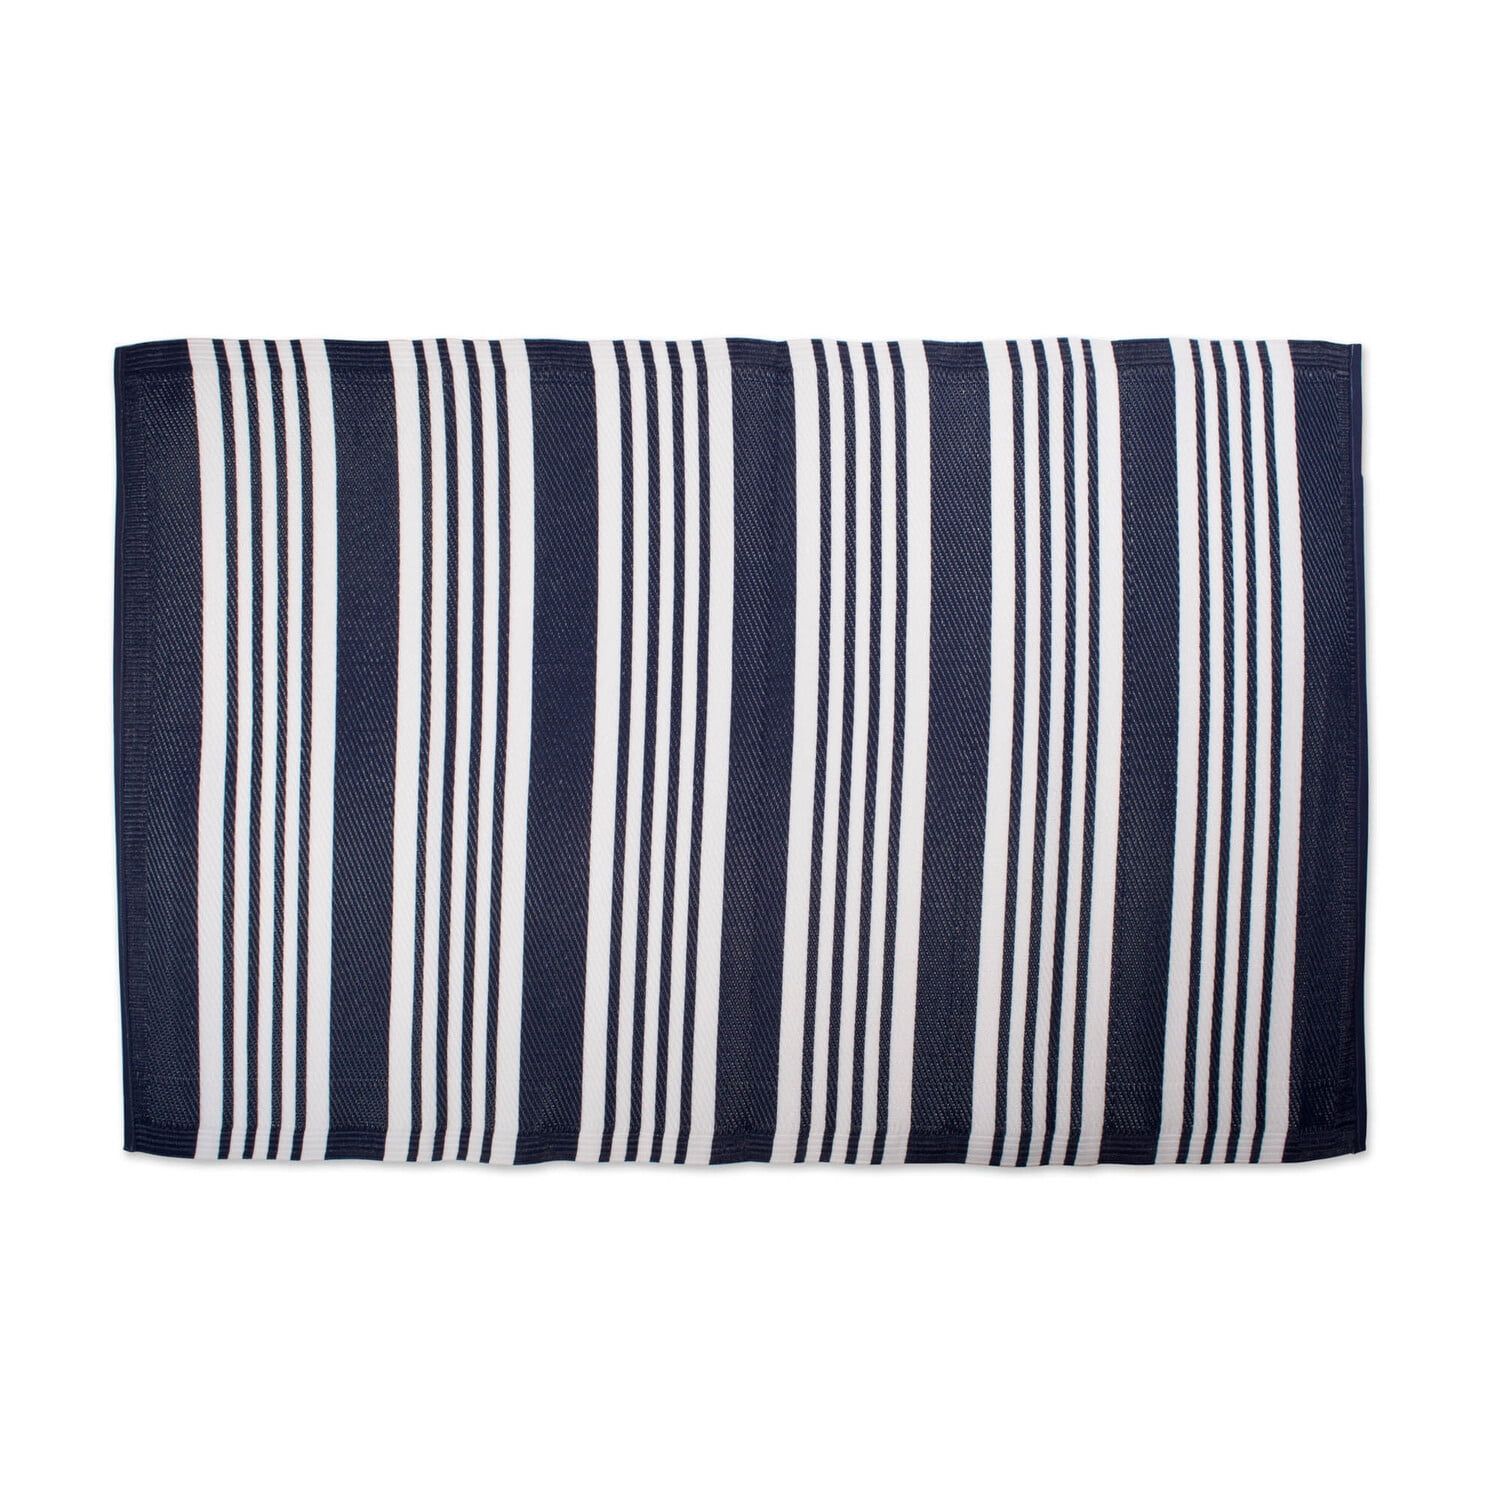 Nautical Blue Stripe Reversible Outdoor Rug, 4' x 6', Synthetic